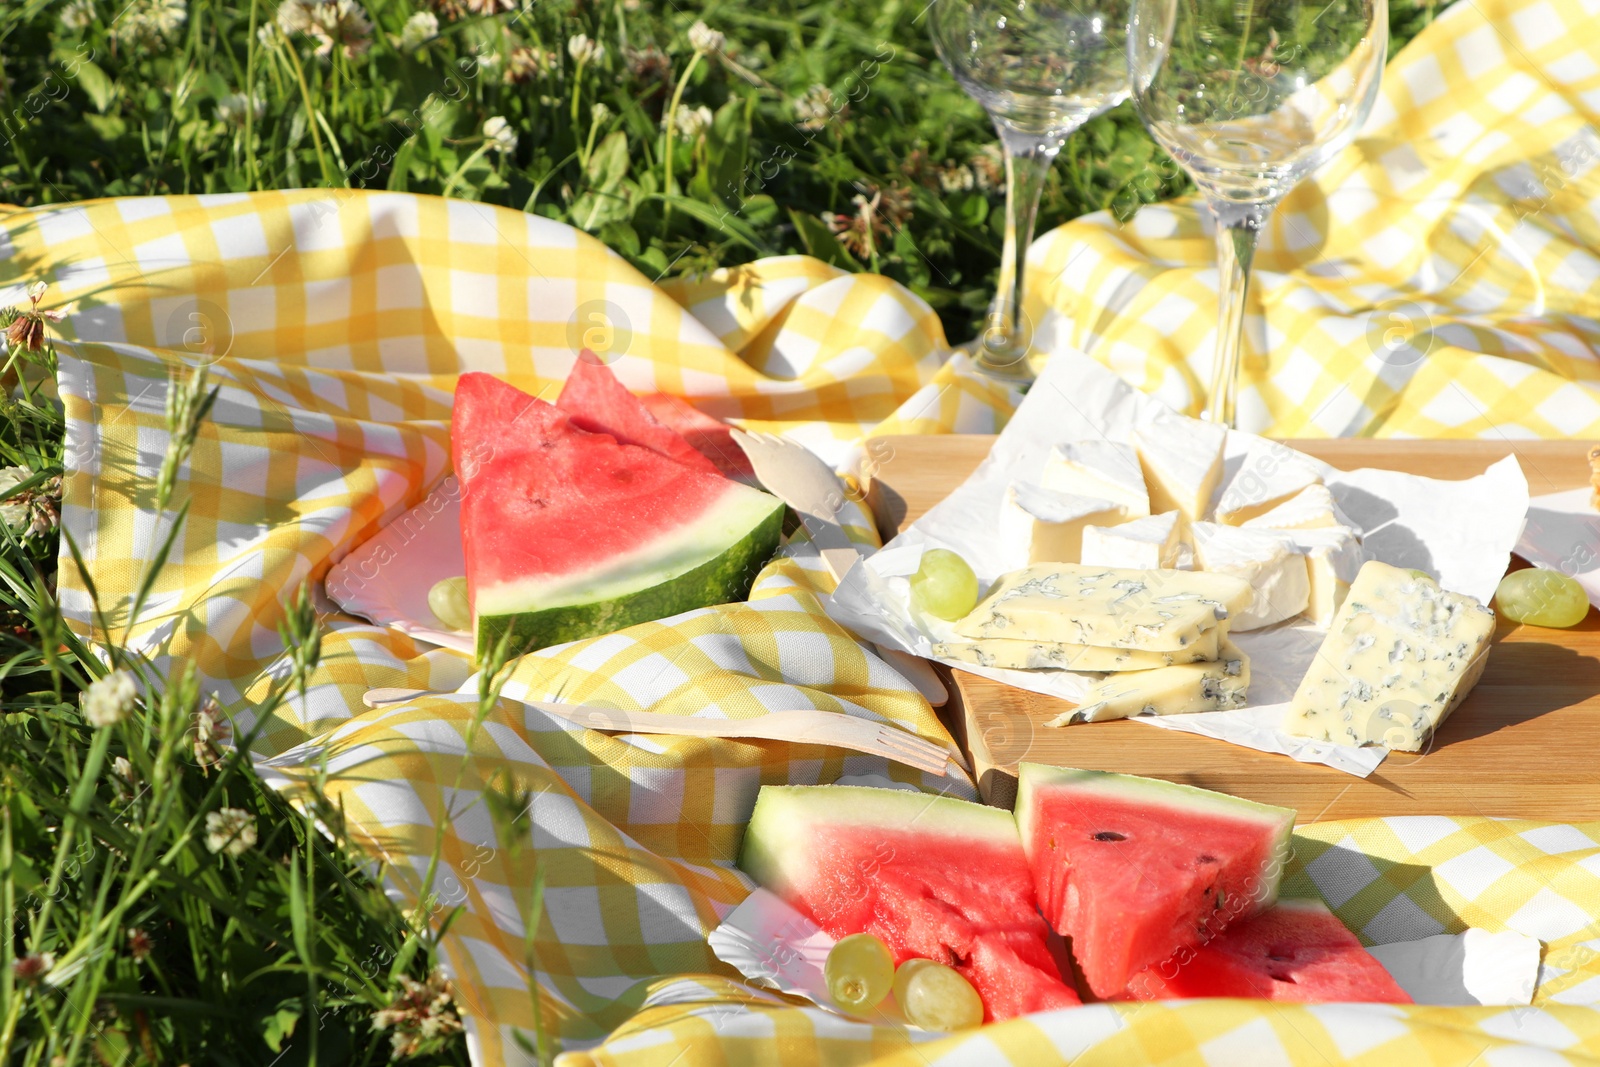 Photo of Picnic blanket with delicious food and wineglasses on green grass outdoors, closeup